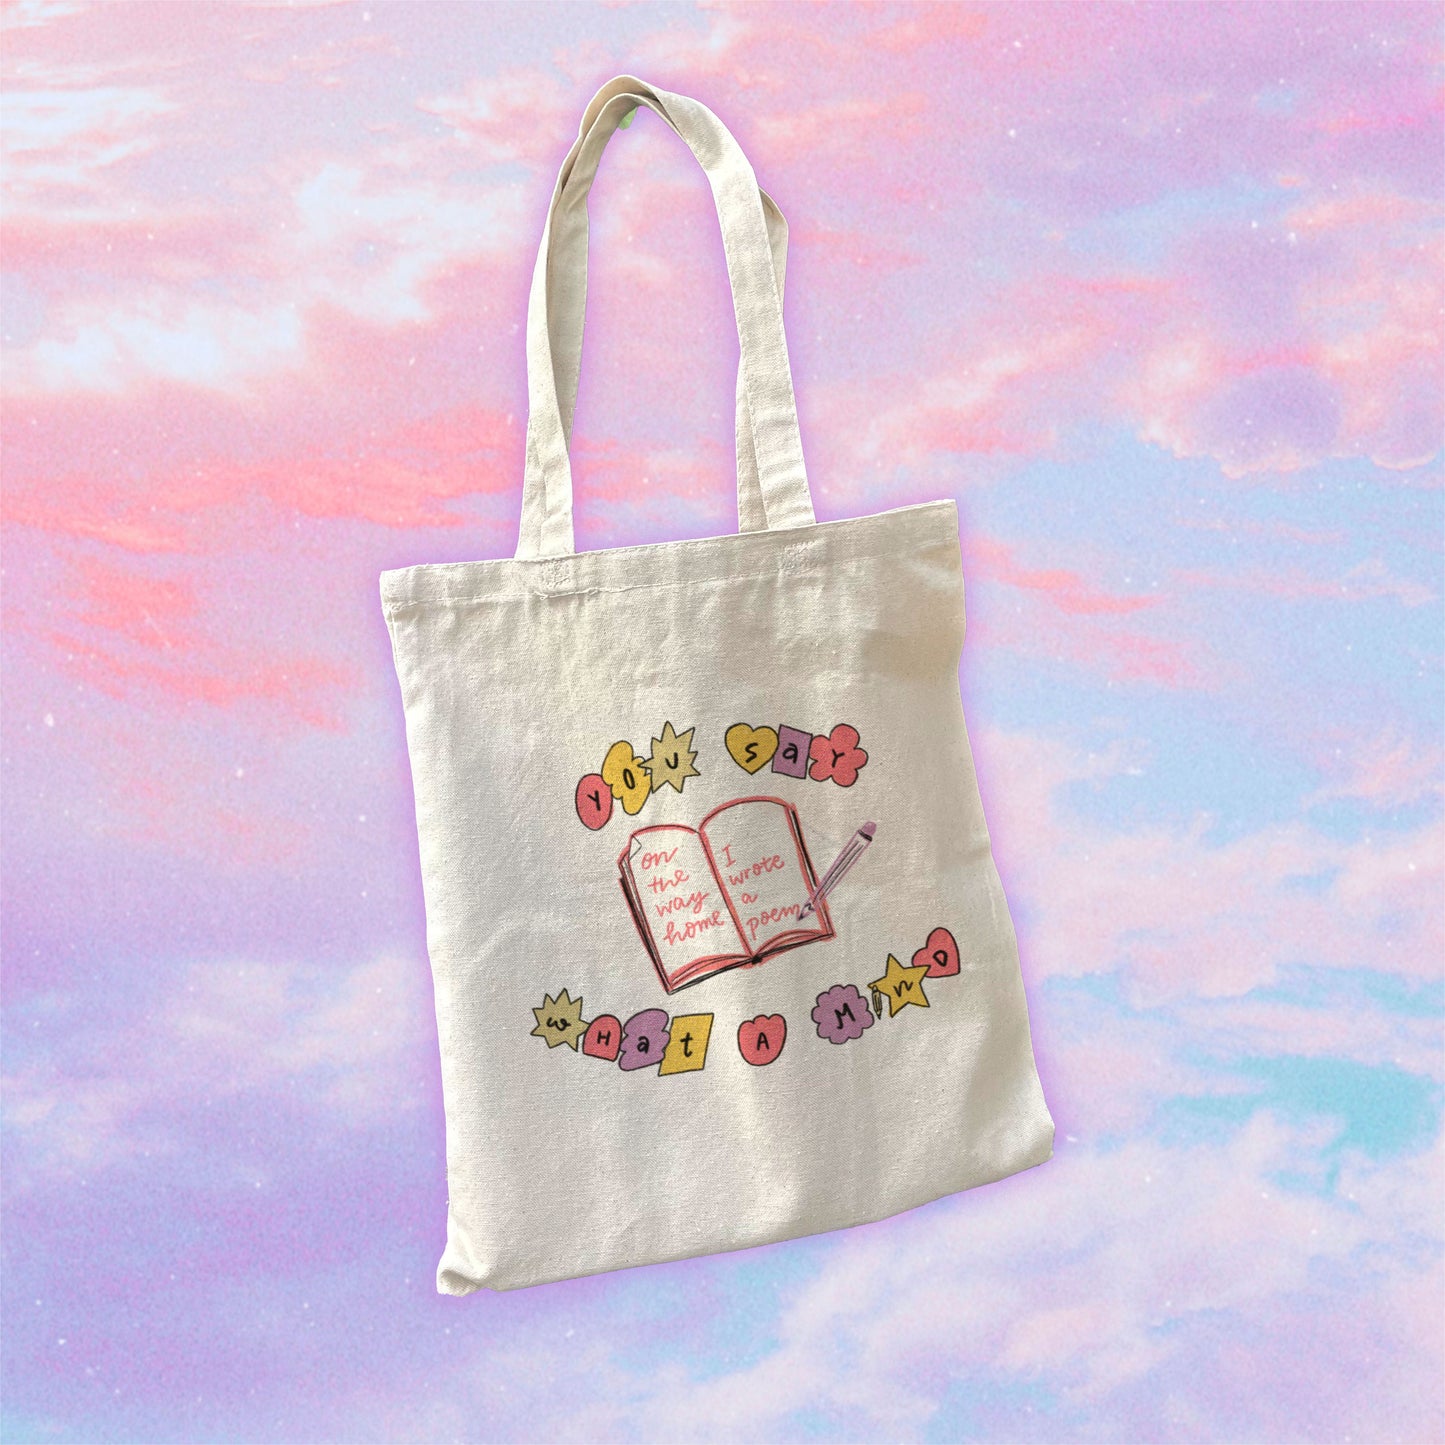 What A Mind Tote Bag